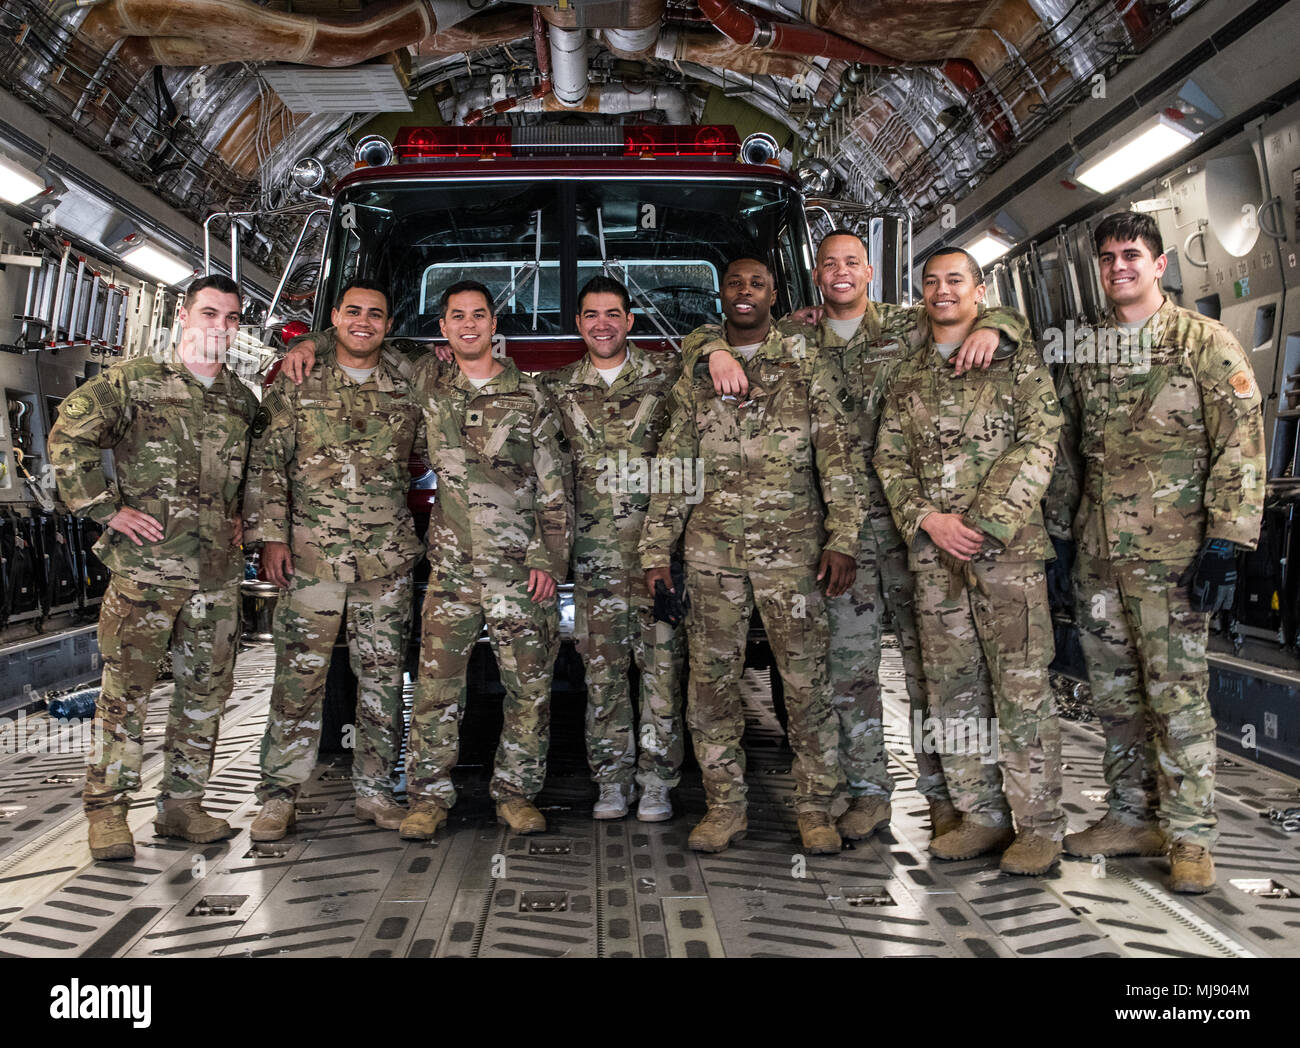 U.S. Airmen with the 21st Airlift Squadron and the 860th Aircraft Maintenance Squadron pose for a photo while delivering Denton Program emergency response vehicles at La Aurora International Airport, Guatemala City, Guatemala, April 20, 2018. The Denton Program is a Department of Defense transportation program that moves humanitarian cargo, donated by U.S. based Non-Governmental Organizations to developing nations to ease human suffering. The emergency vehicles were donated by the Mission of Love Foundation, they are the largest user of the Denton Program, having delivered medical, relief and  Stock Photo